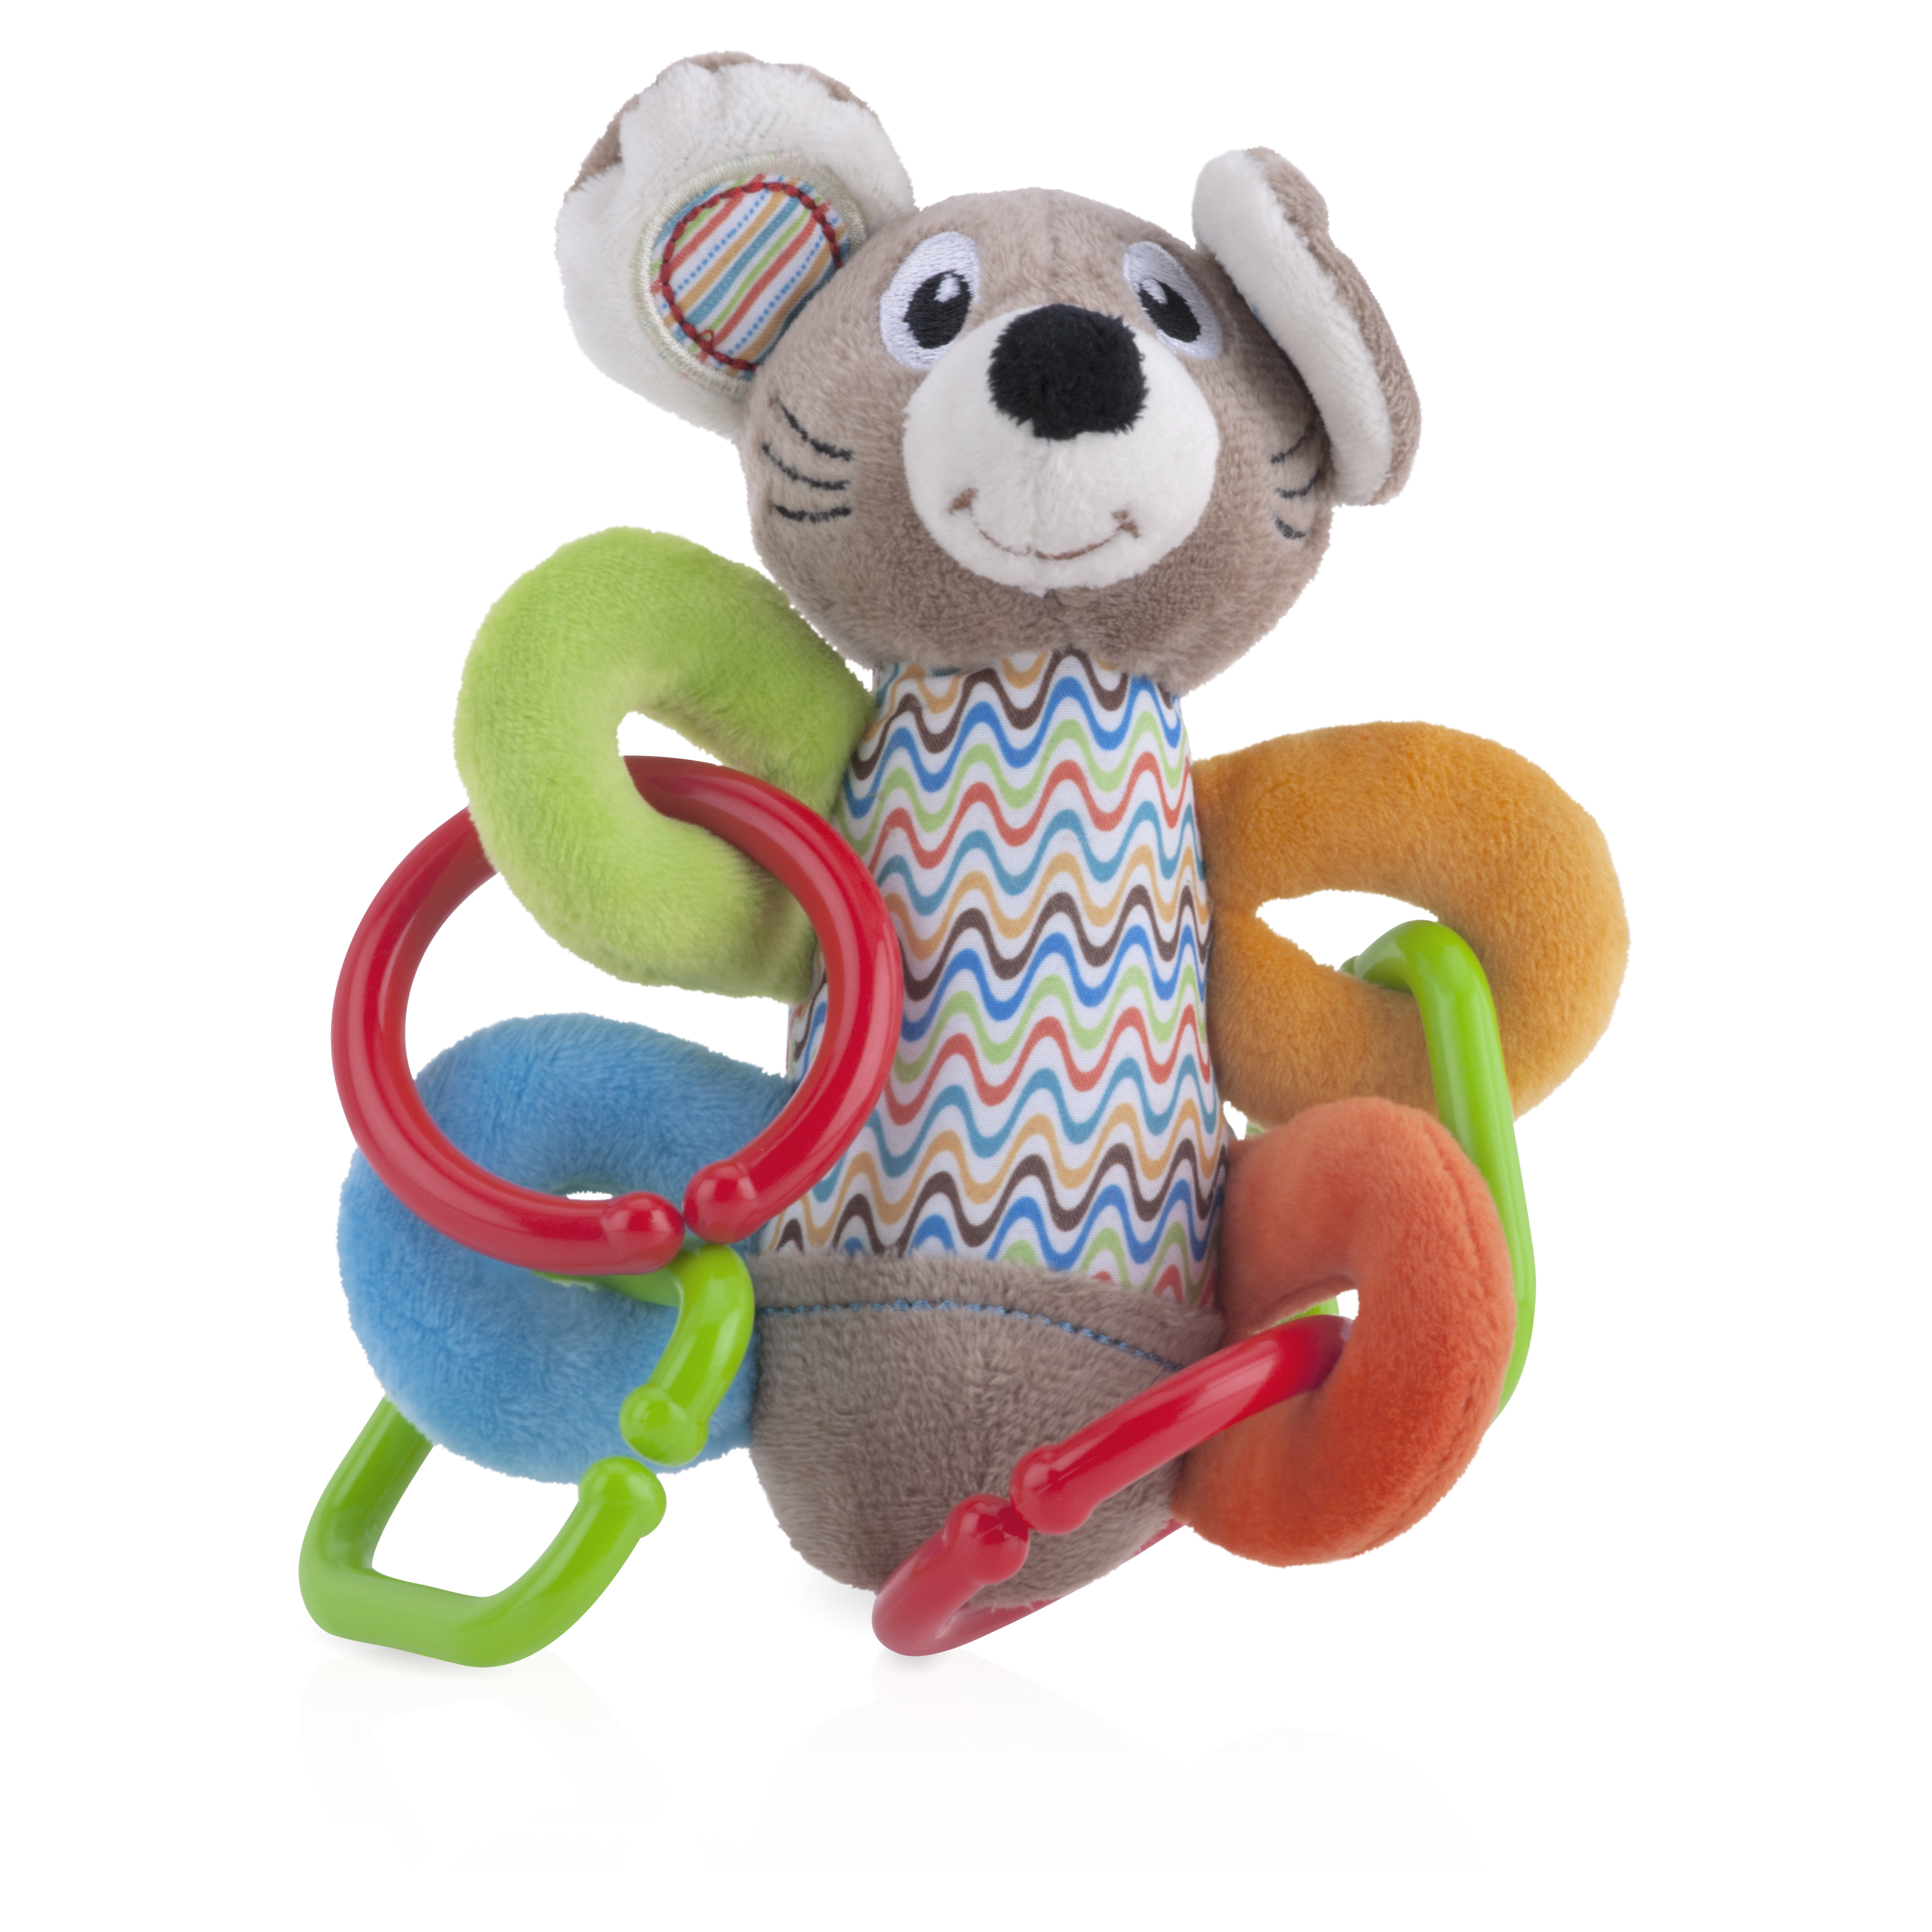 Nuby Squeeze N' Squeak, Styles May Vary - image 3 of 7